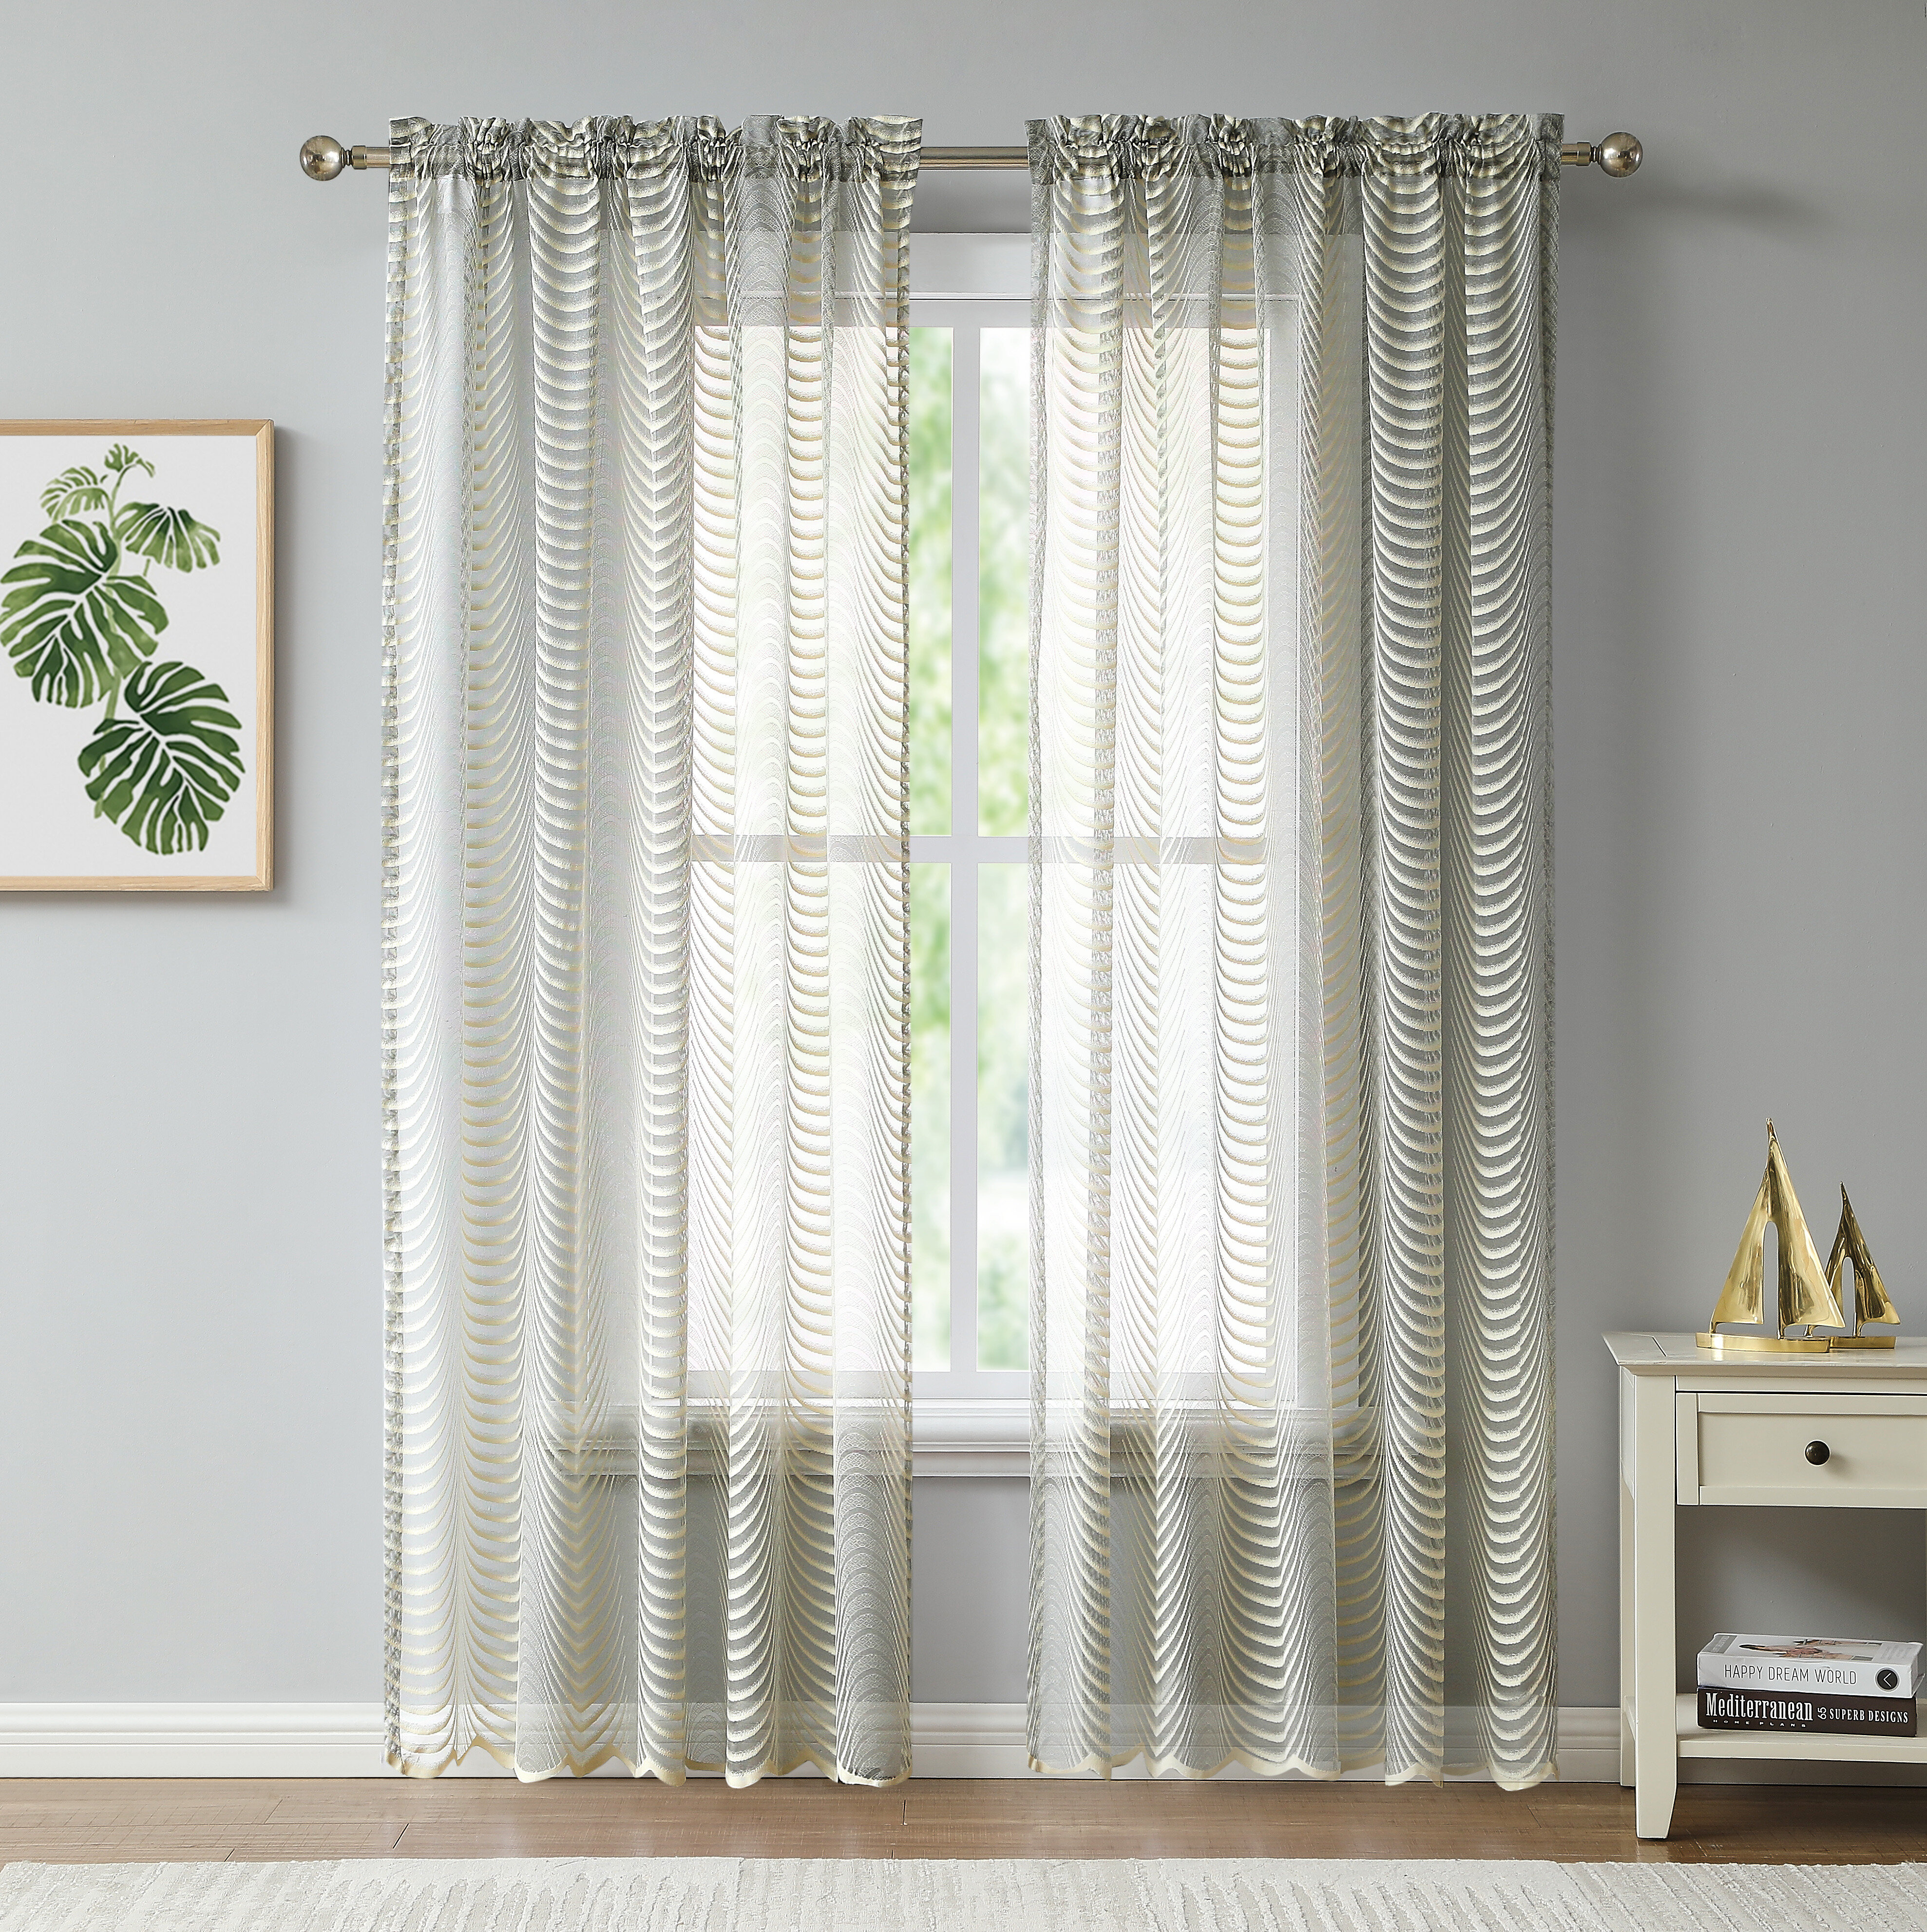 Pleated Wave Design Voile Sheer Panel Window Shade Blinds Rod Pocket Curtain 